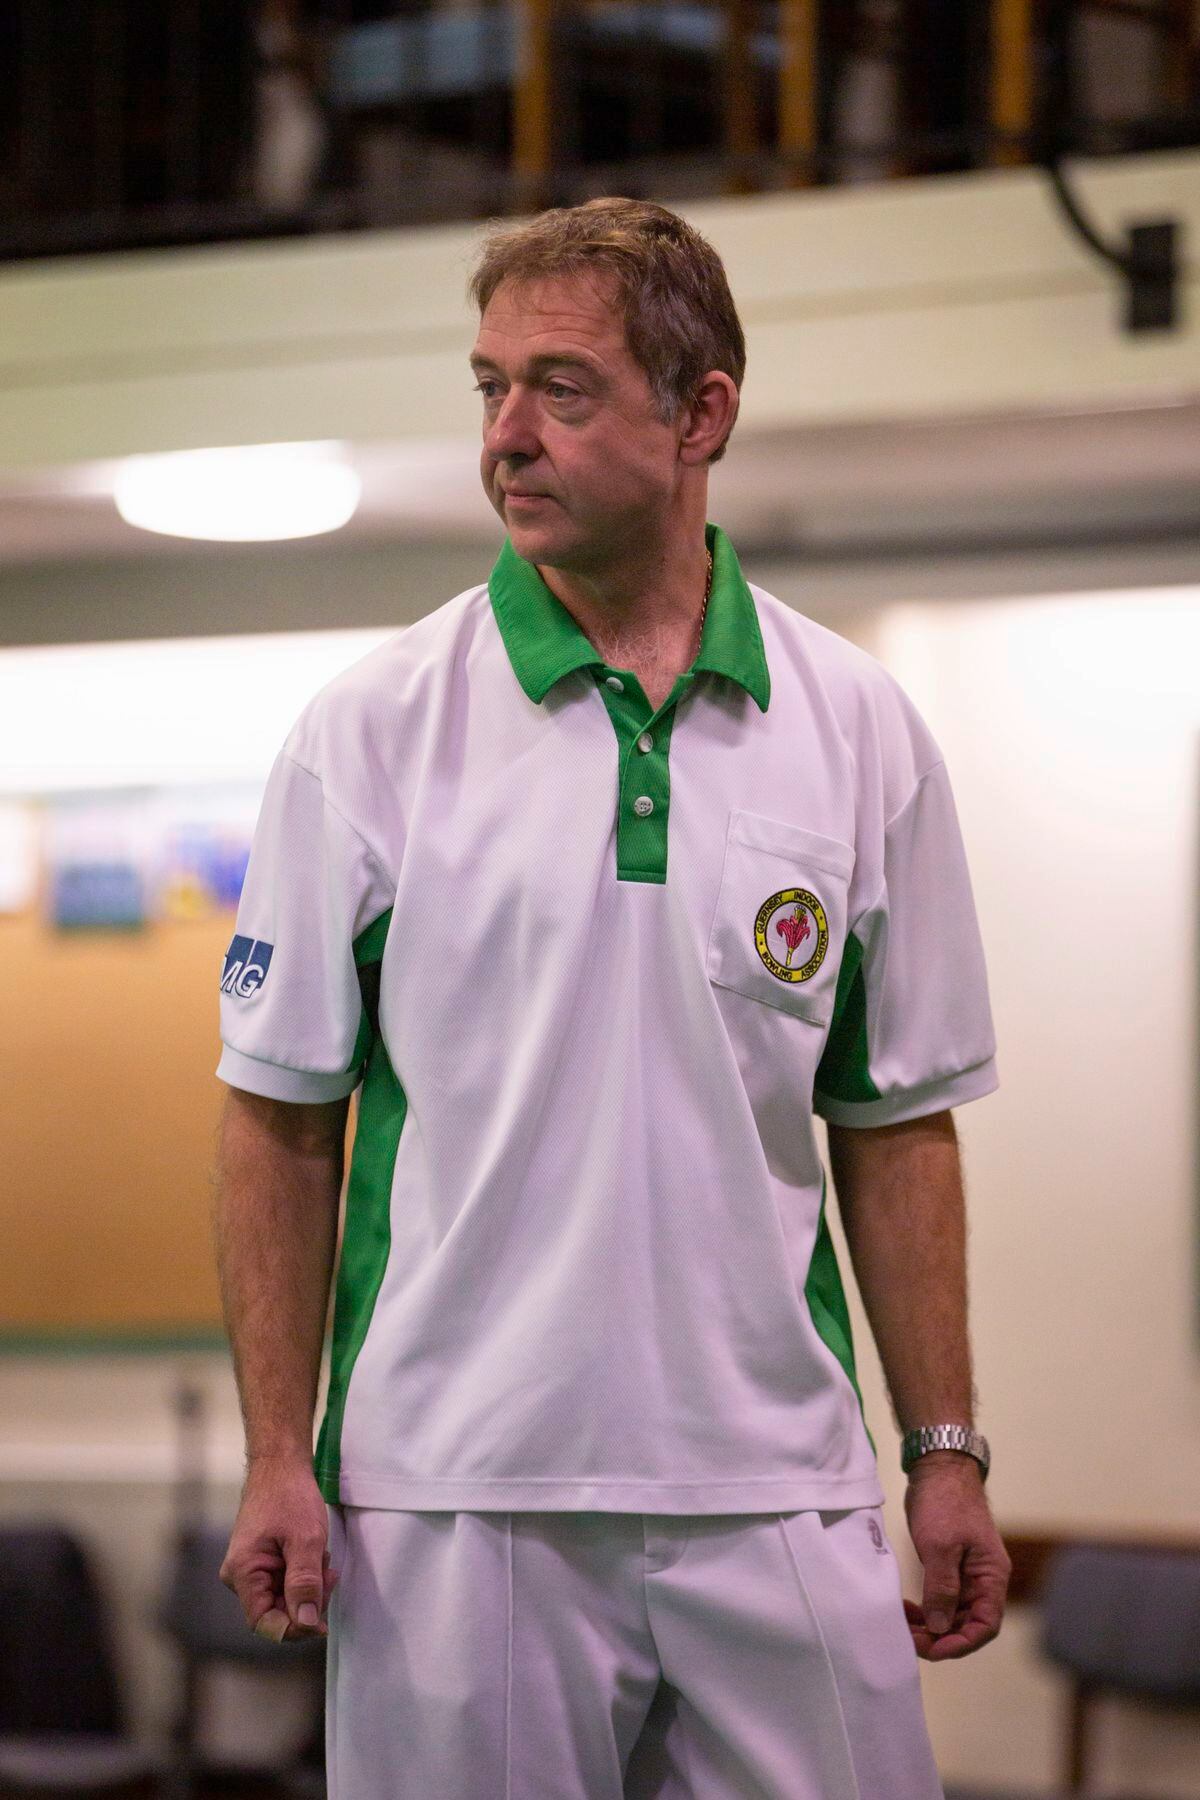 Steve Le Noury won the CI men’s singles title with a fine win over Alex Stewart. (Picture by Sophie Rabey, 30372457)